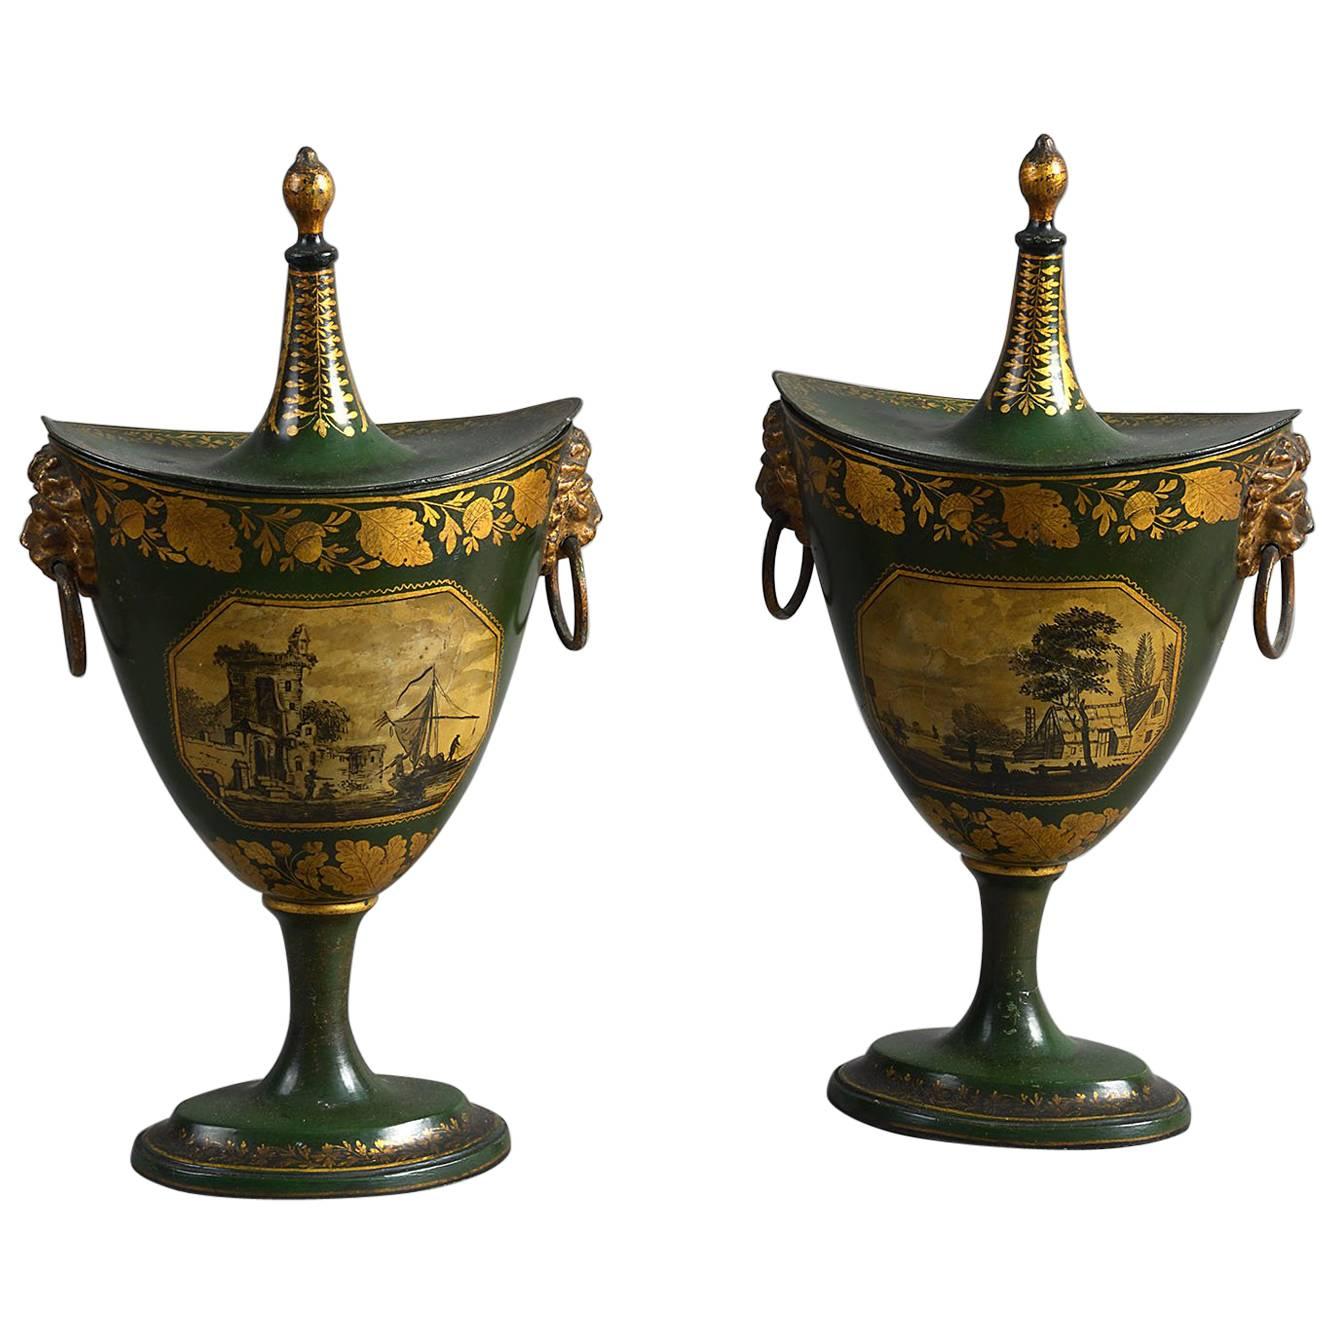 Pair of Early 19th Century George III Green Toleware Covered Chestnut Urns